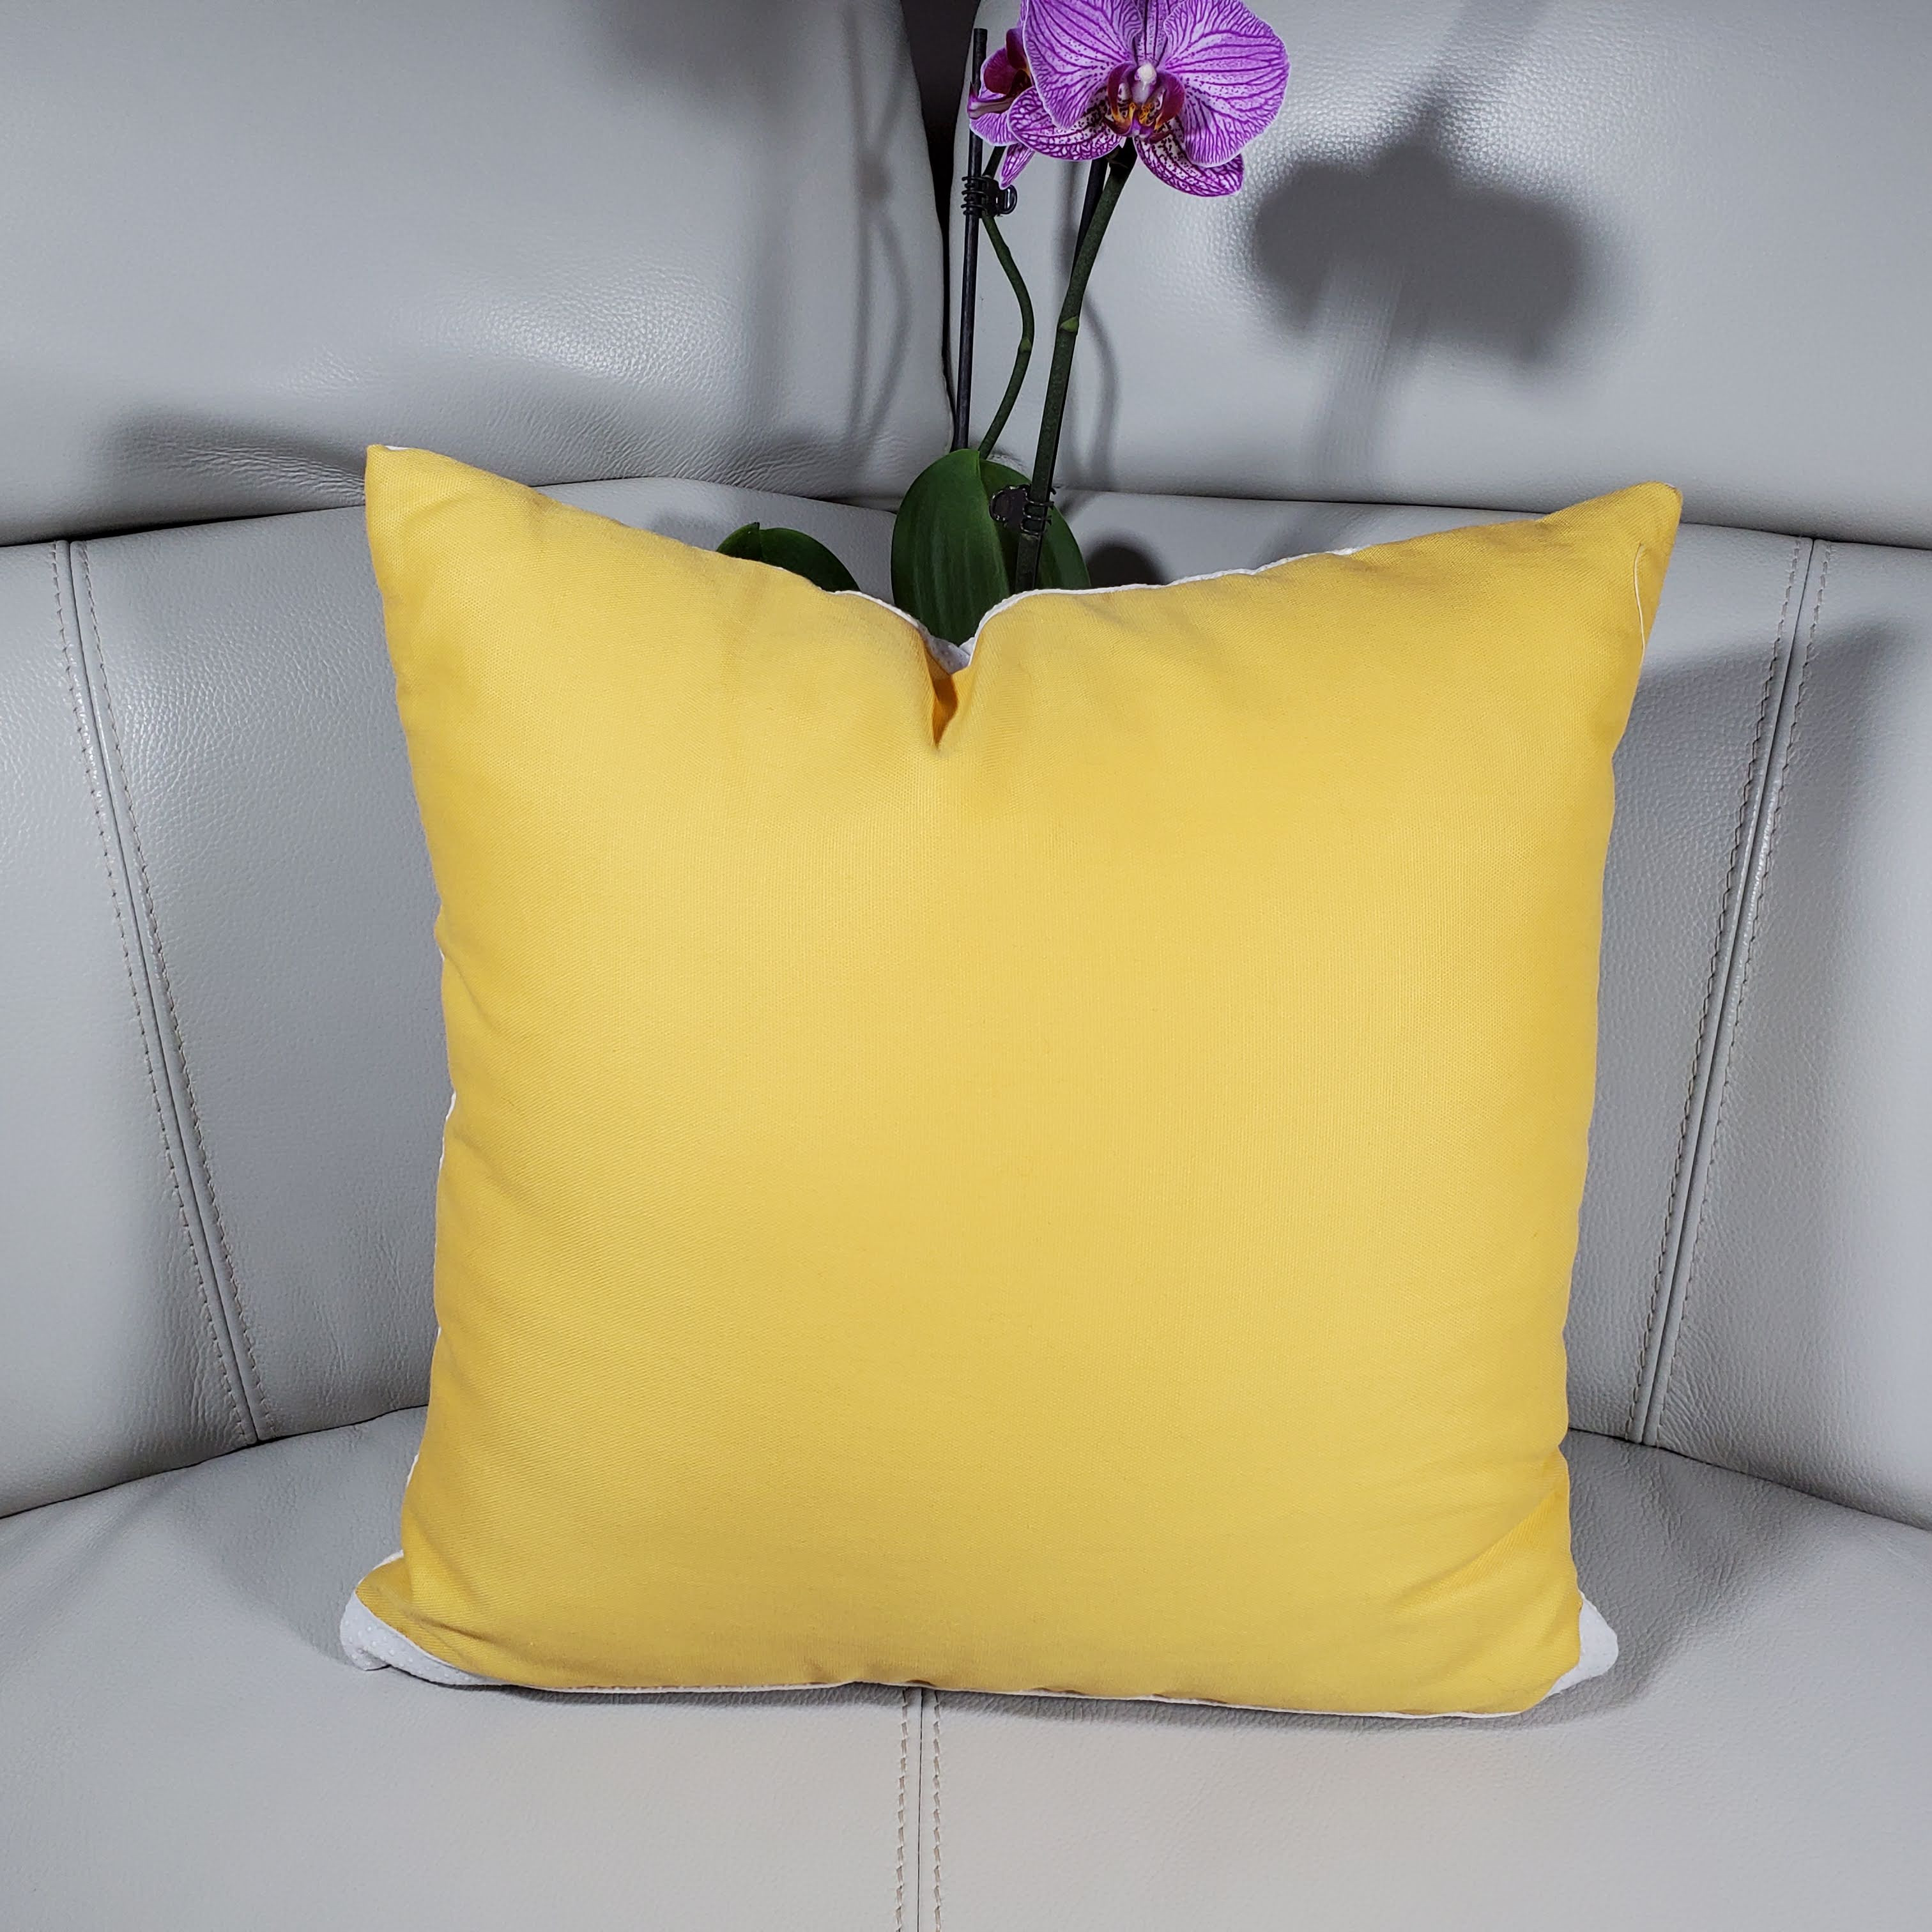 Non-Slip Throw Pillow Cover, Non Slip on Leather Couch, Pillow Cover Will  Not Slide So Easily on Leather Decorative Nonslip Pillow Case Resists